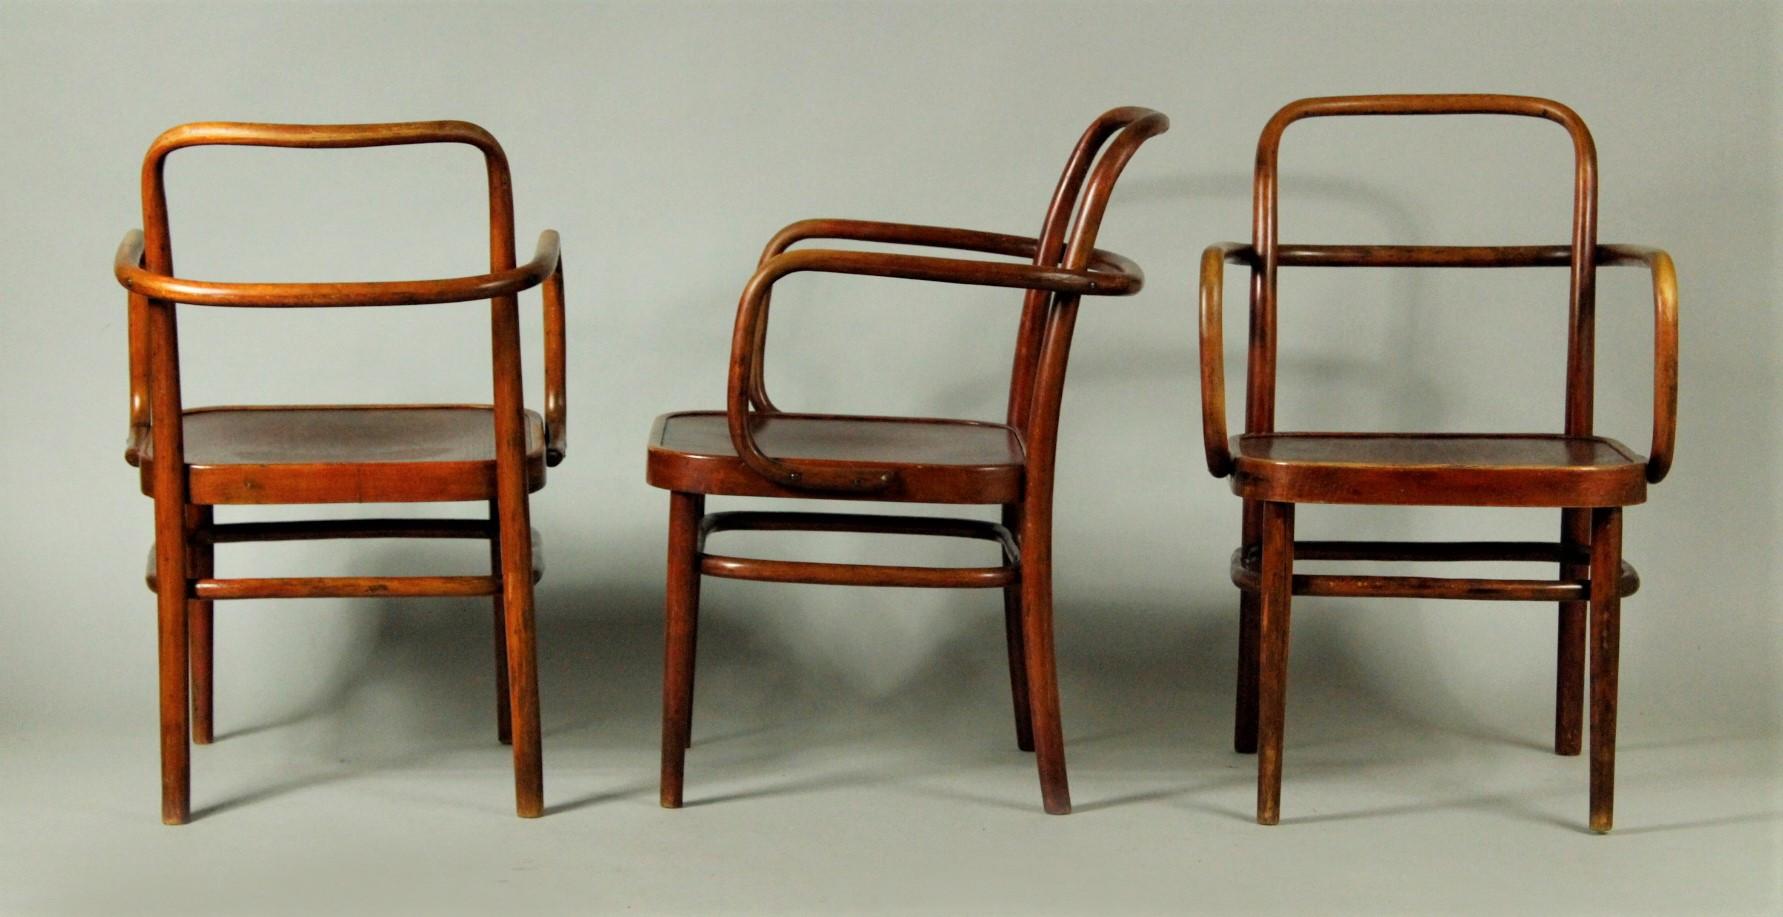 Three armchairs mod. A 64 F designed by Gustav Adolf Schneck in 1925, manufactured by Thonet. All armchairs are marked with Thonet brandmark. They are in very good original condition with stable constuction, the original red shellac polish has been